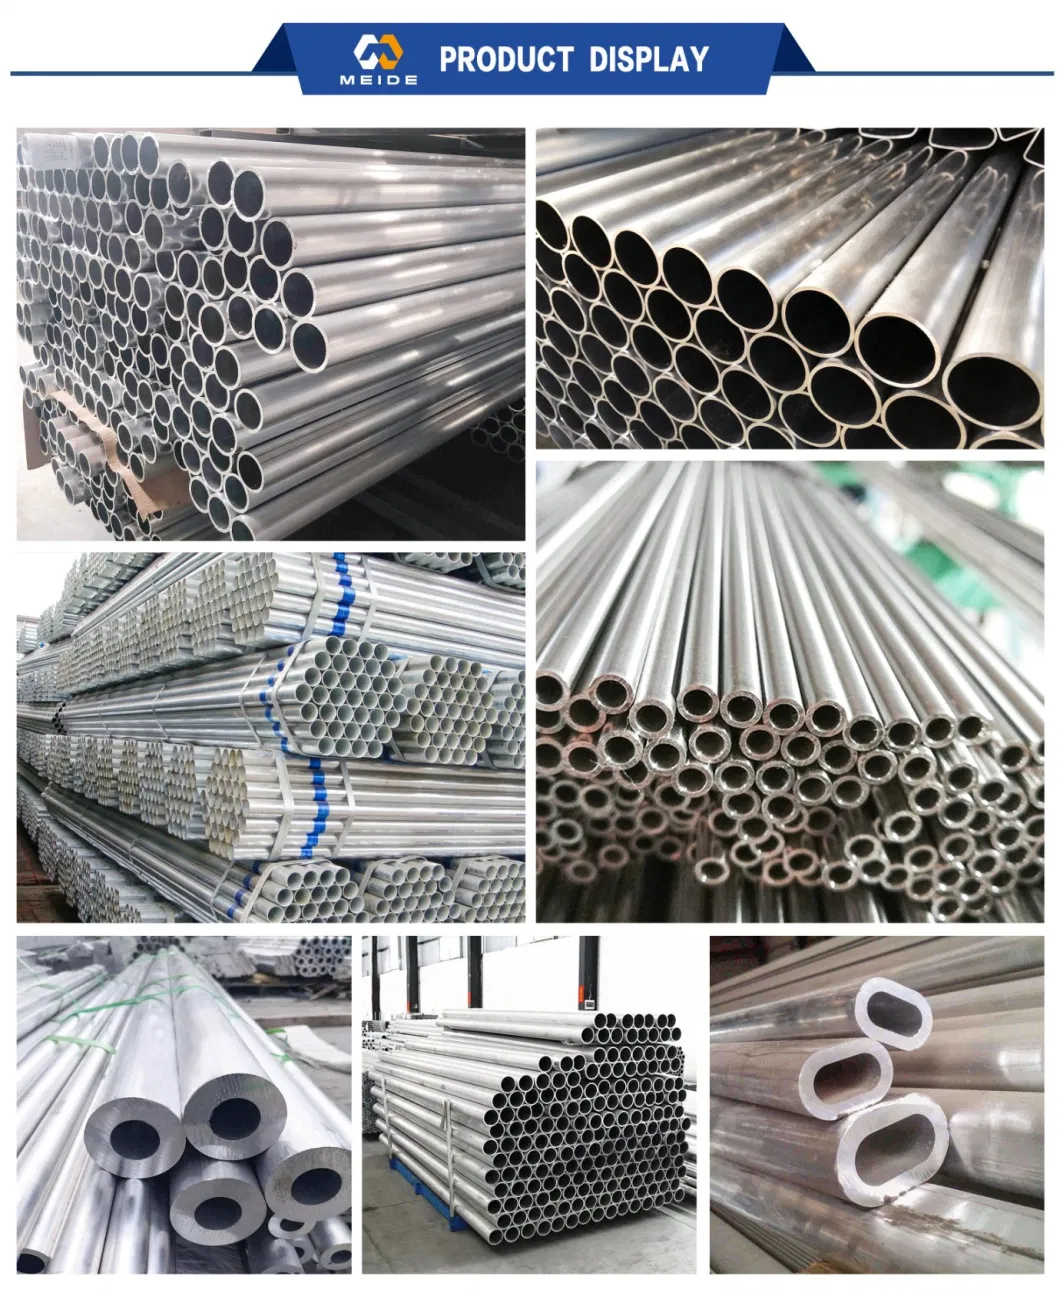 High Quality Alloy Aluminum Tubes 7050 Alzn5.5mgcu 7075 A7075 A97075 3.4365 Aluminum Tubes Are Used for Aircraft Structural/Rivet/Propeller Components